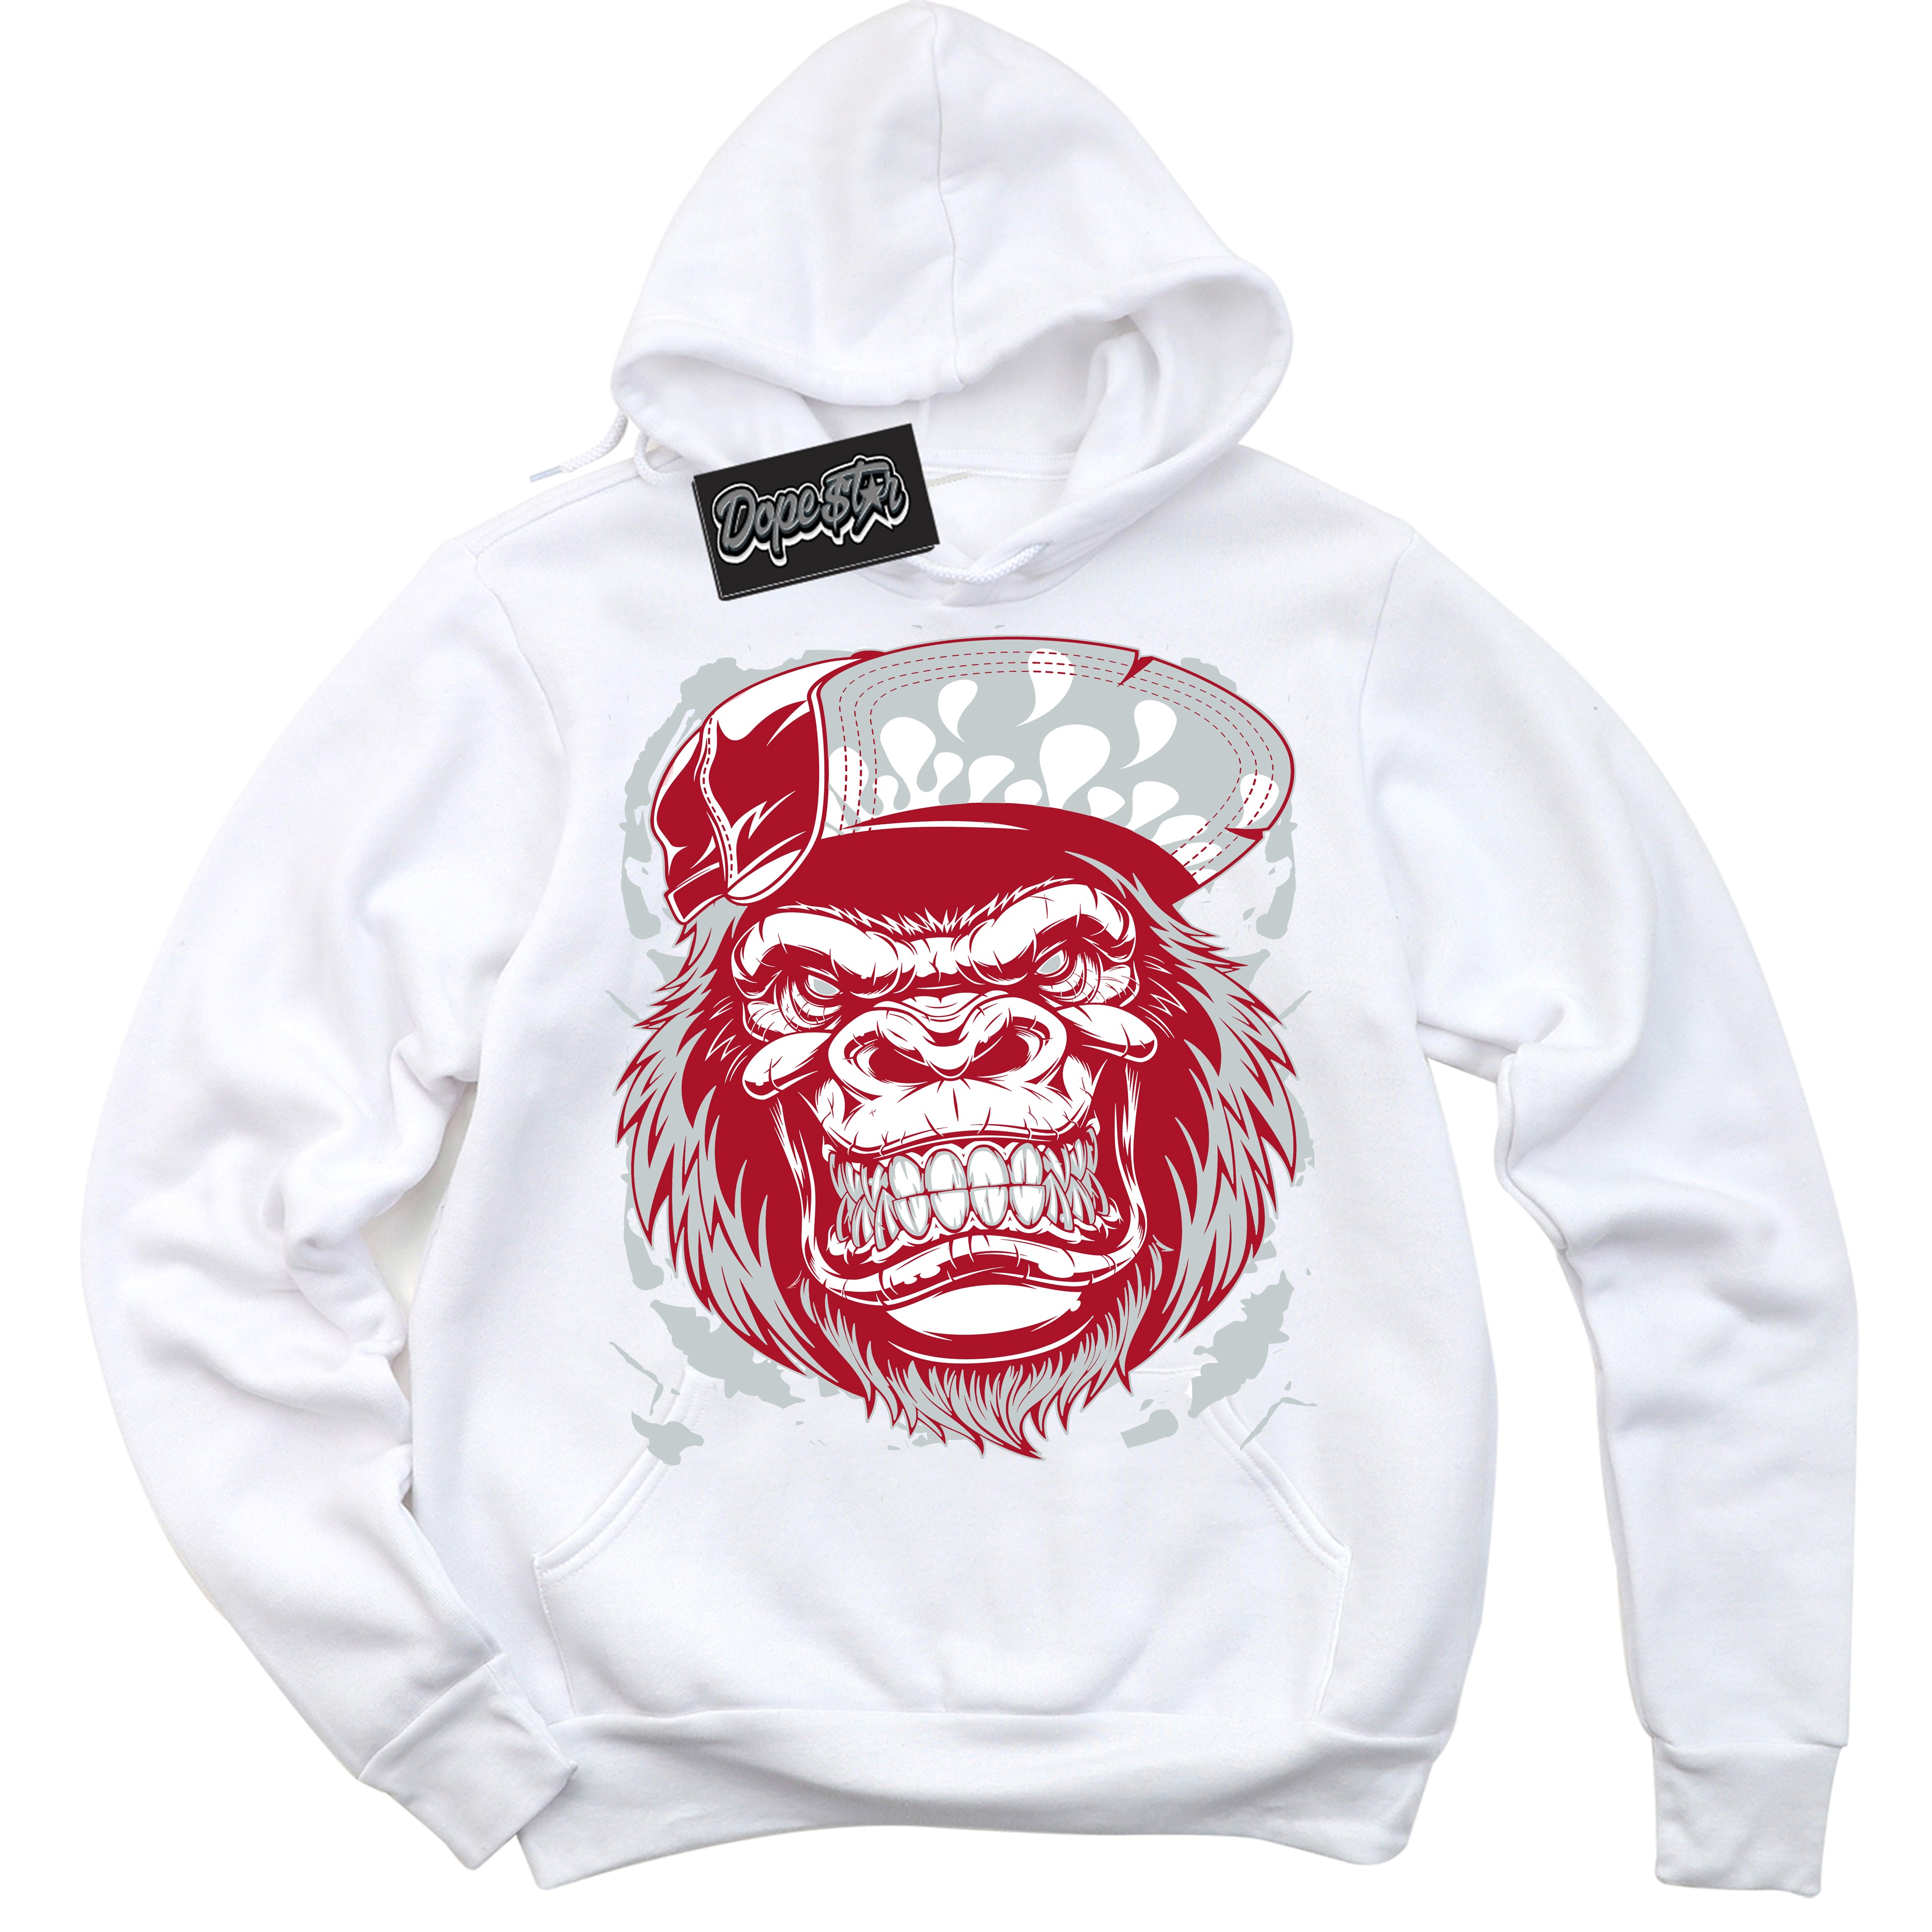 Cool Black Hoodie with “ Gorilla Beast ”  design that Perfectly Matches  Reverse Ultraman Sneakers.